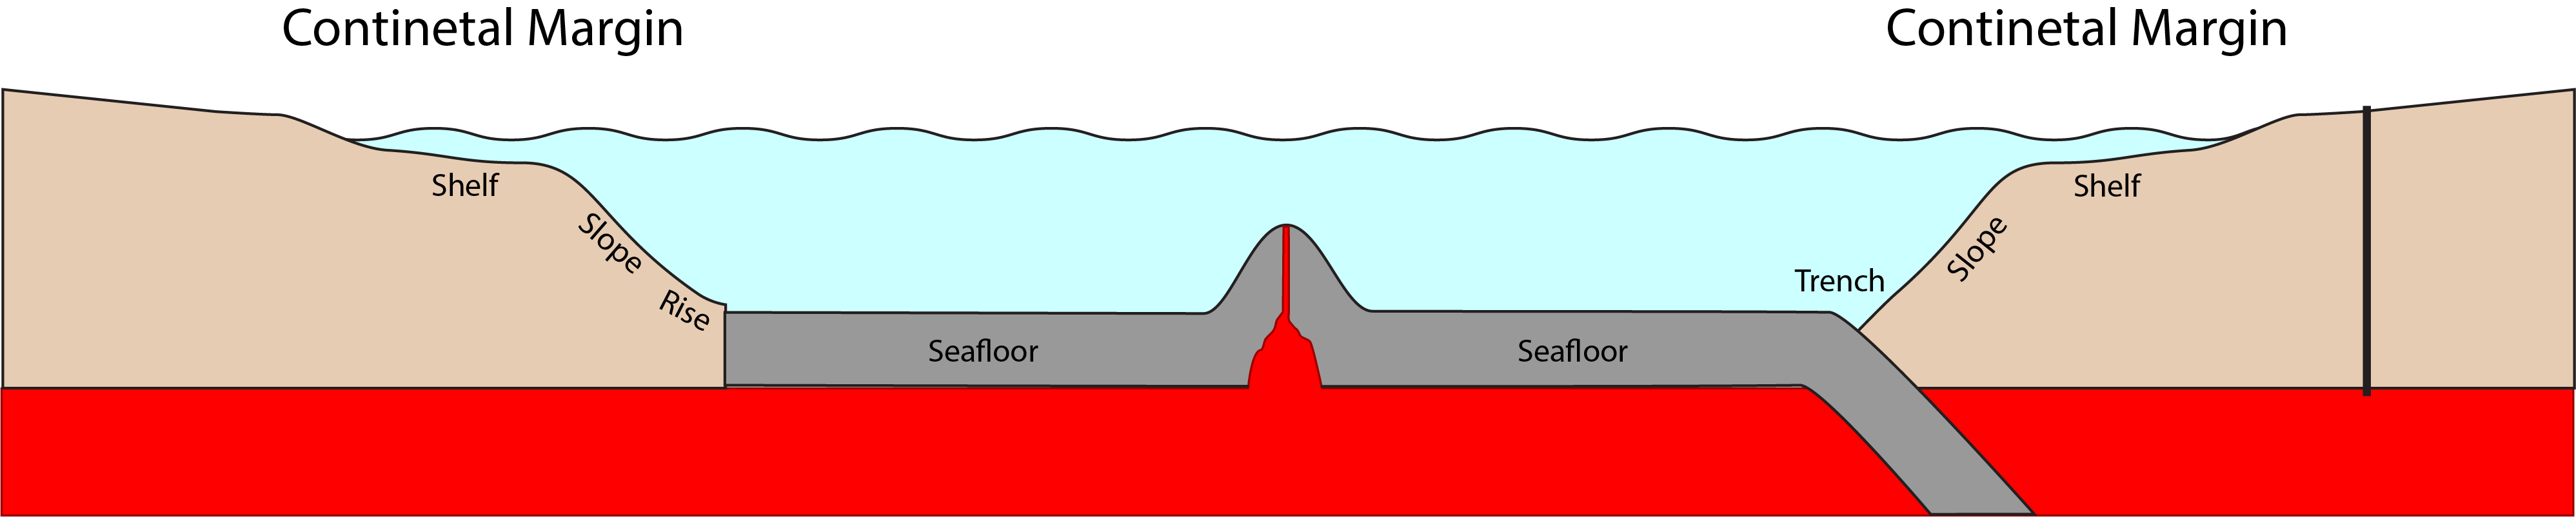 Profile extending from the continental margin (left), dropping off to the deep sea floor, where there is a spreading center in the middle.  The abyssal plain continues to the left before subducting beneath another continental plate on the right.